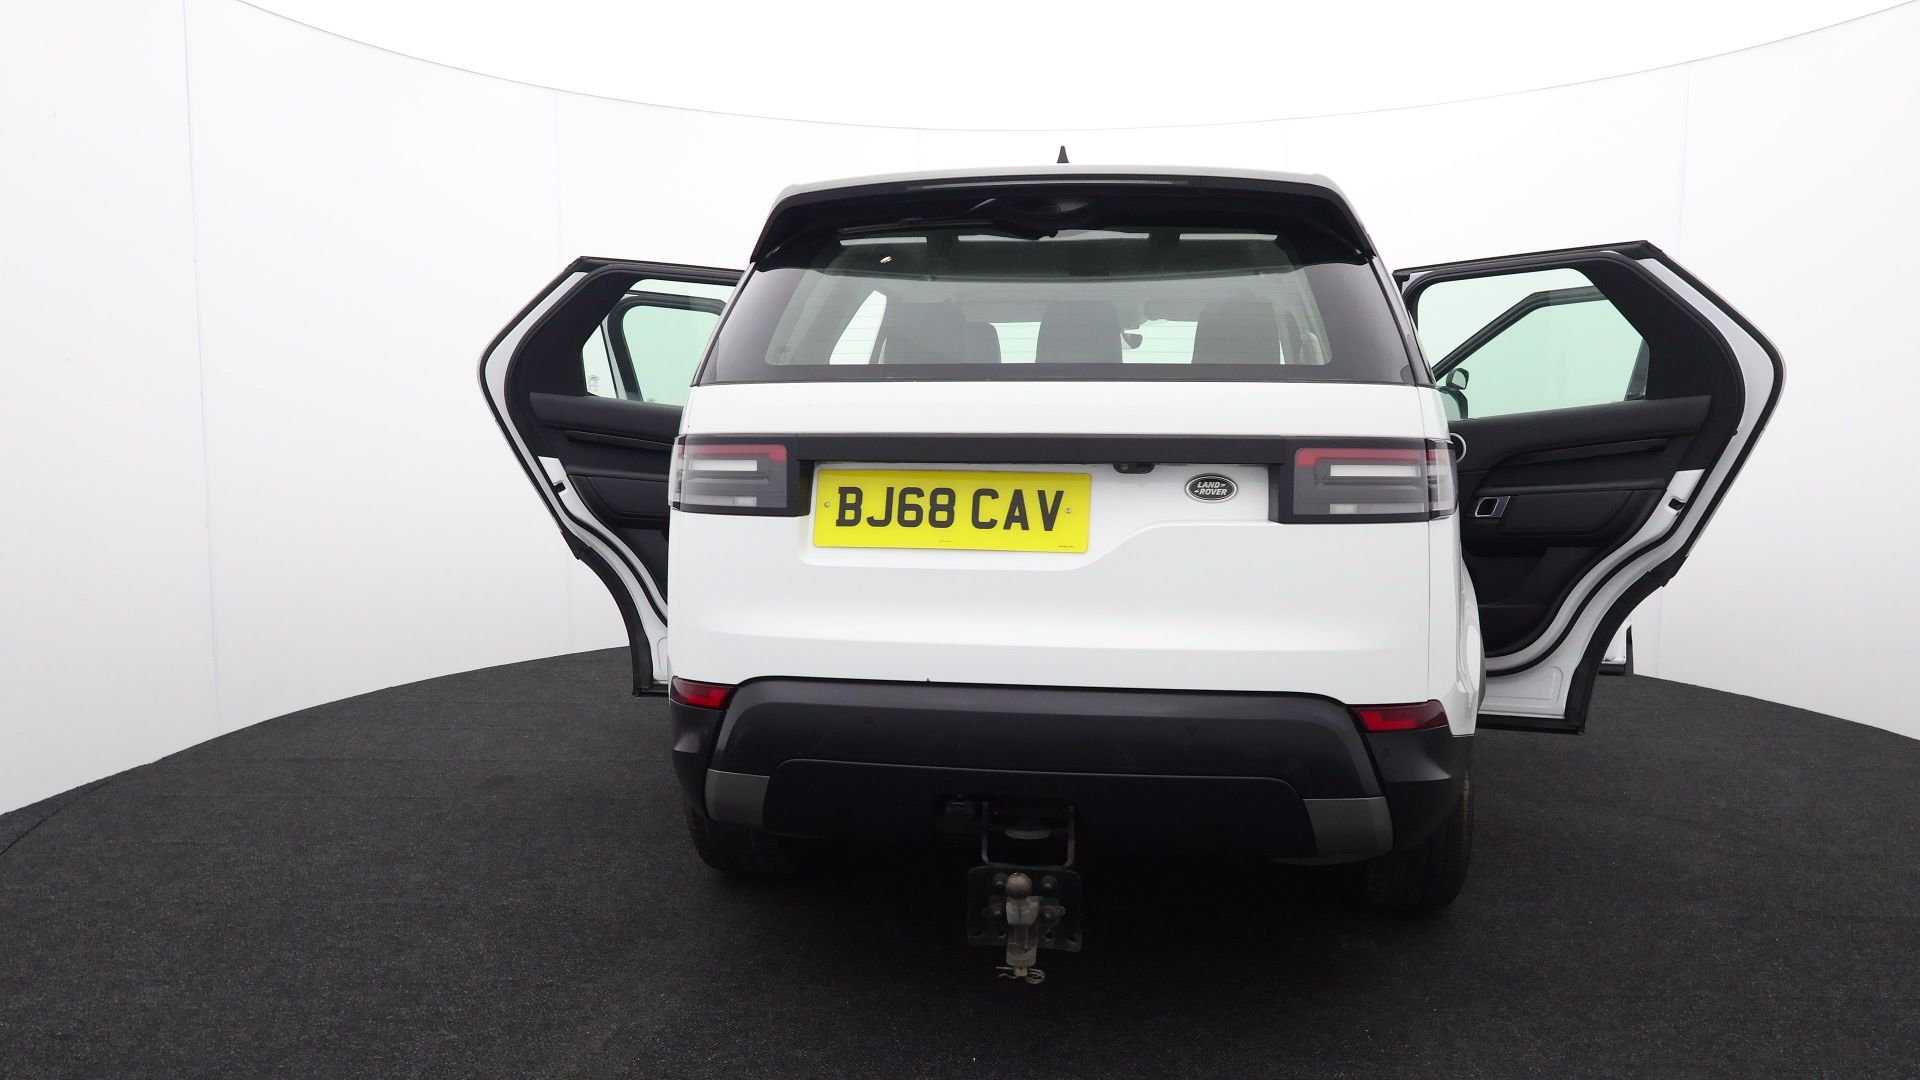 Land Rover Discovery 5 SDV6 3.0 DSE - BJ68 CAV - Image 63 of 66